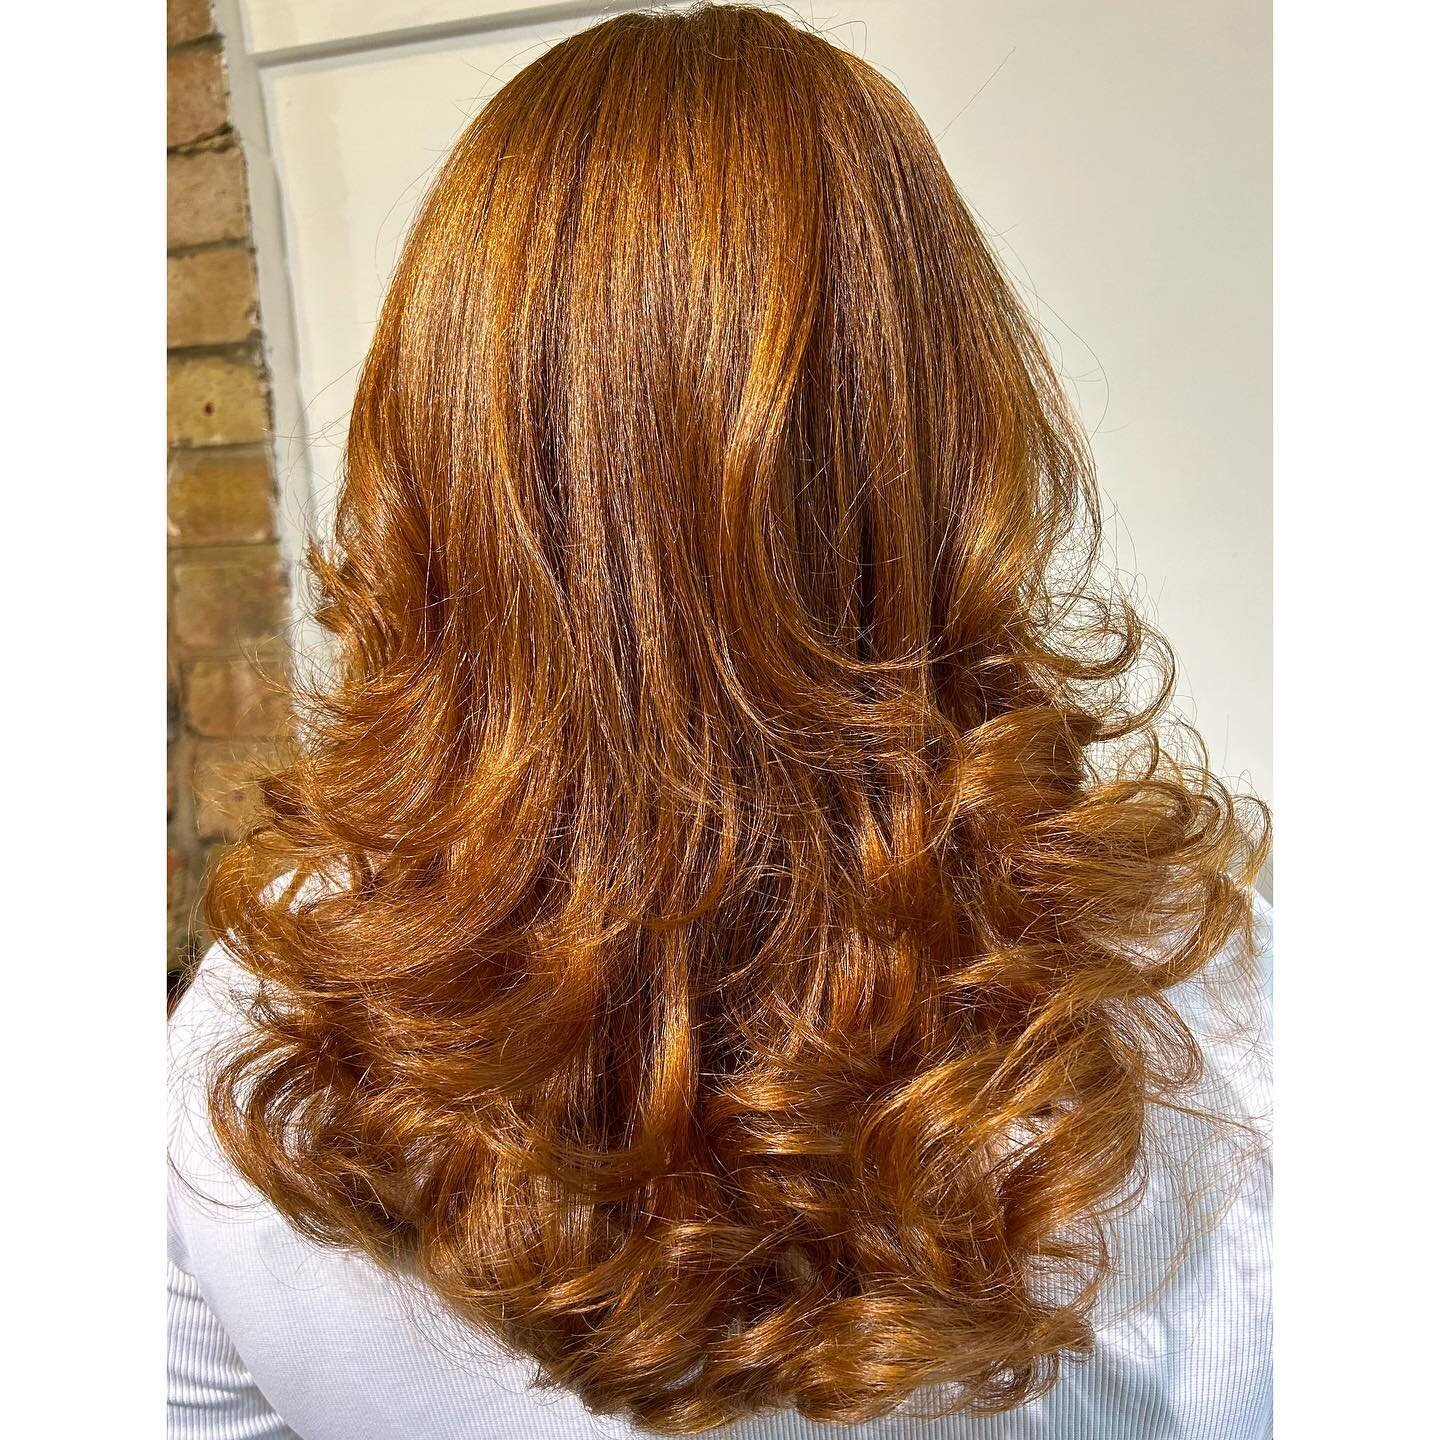 👑🇬🇧Happy coronation day!👑🇬🇧 The most glossy gorgeous bouncy blowdry for the lovely @wellybootbakery ready for the long weekend, have fun all!👑🇬🇧🙌🏻 #hairdresser #hairsalon #newhair #blowdry #lorealsalon #loreal #kerastase #kerastaseclub #lo